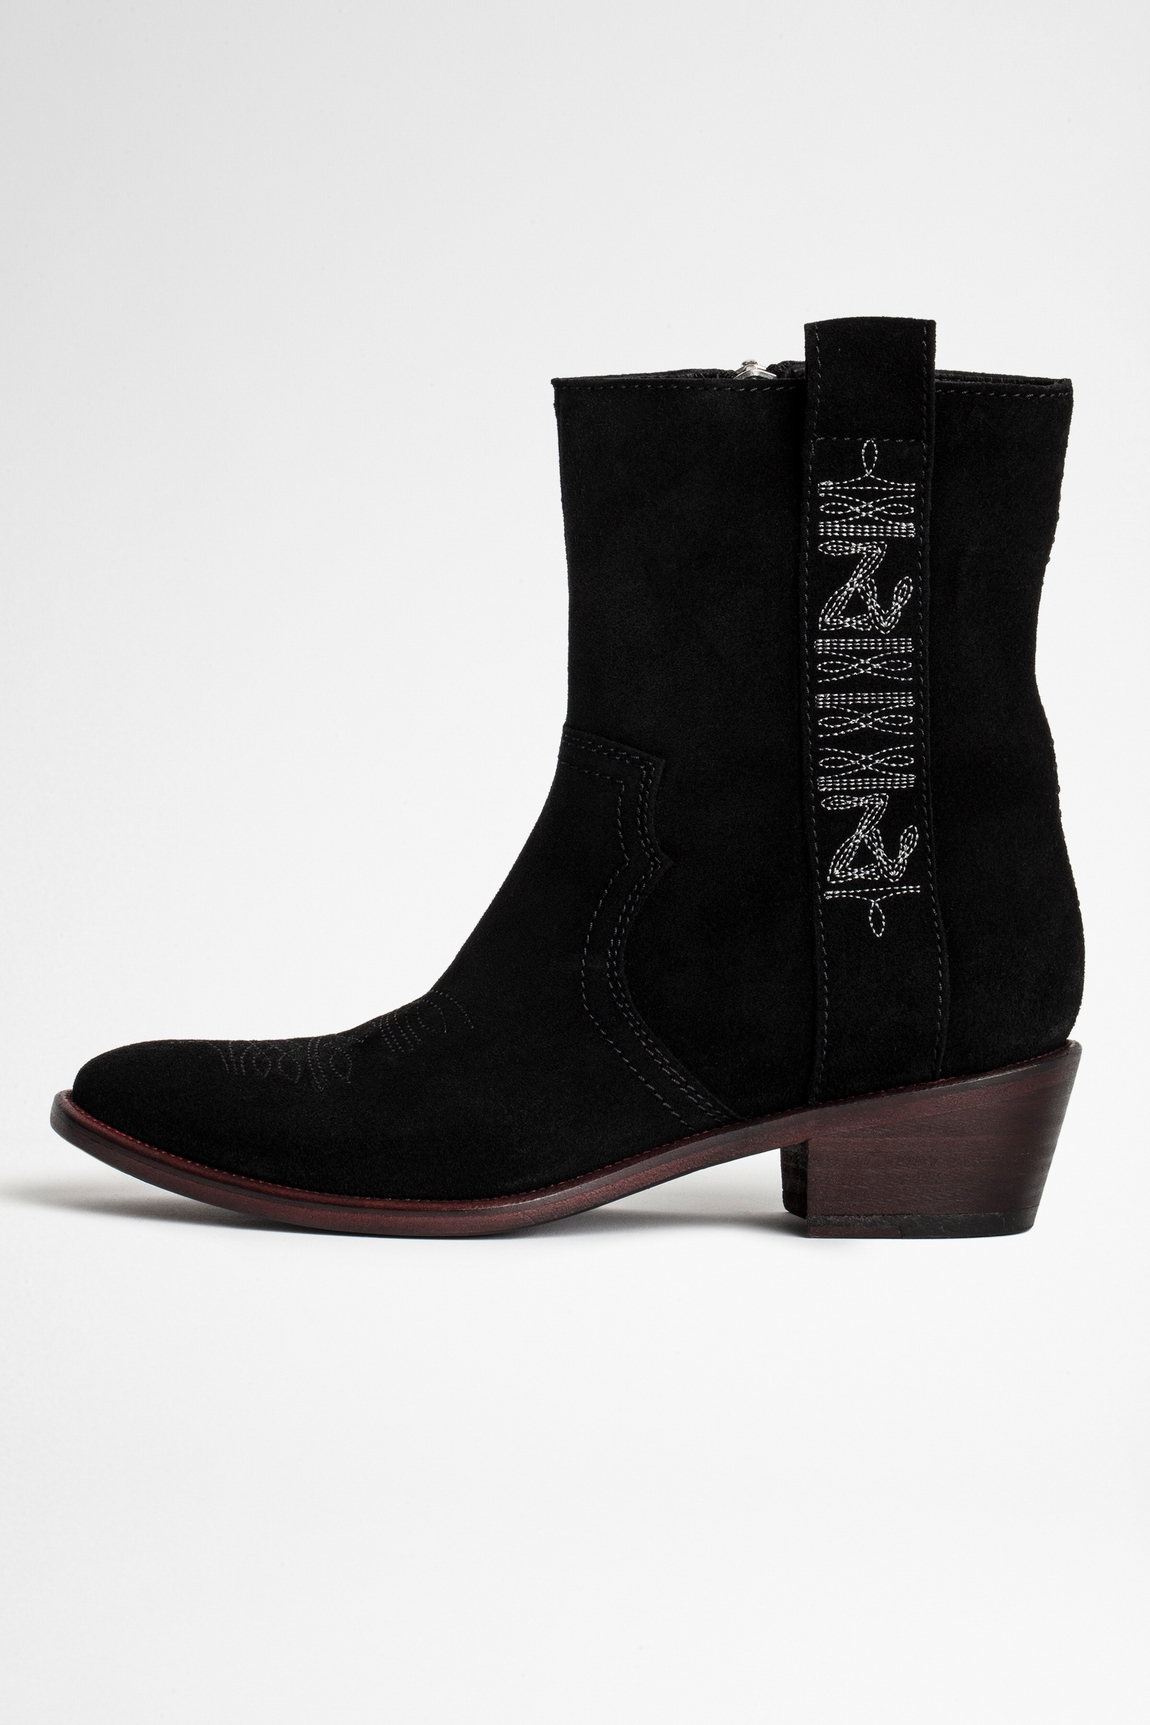 PILAR HIGH SUEDE ANKLE BOOTS